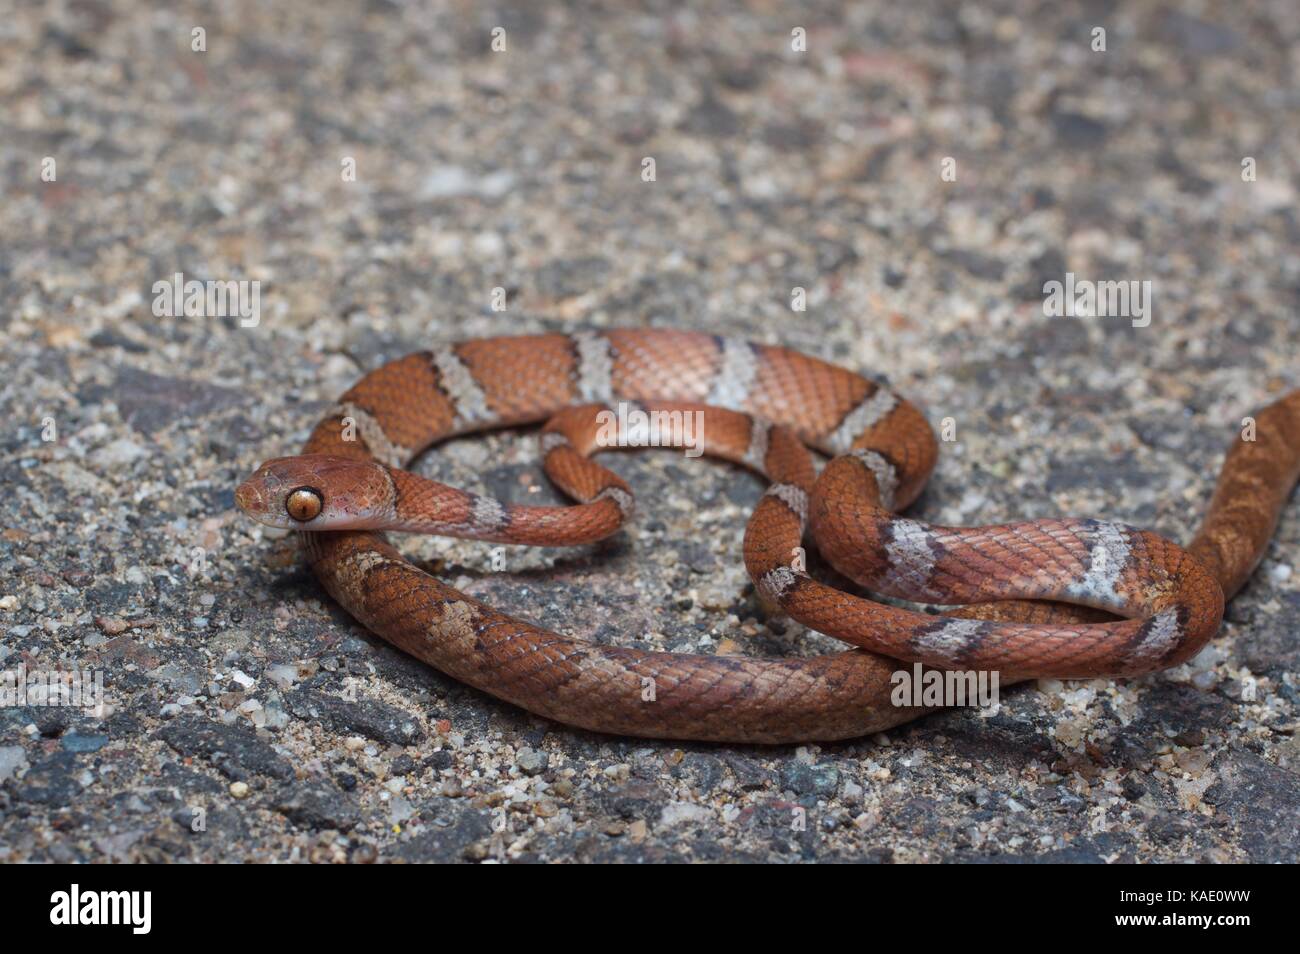 A Central American Tree Snake (Imantodes gemmistratus) on a paved road at night near Álamos, Sonora Mexico Stock Photo